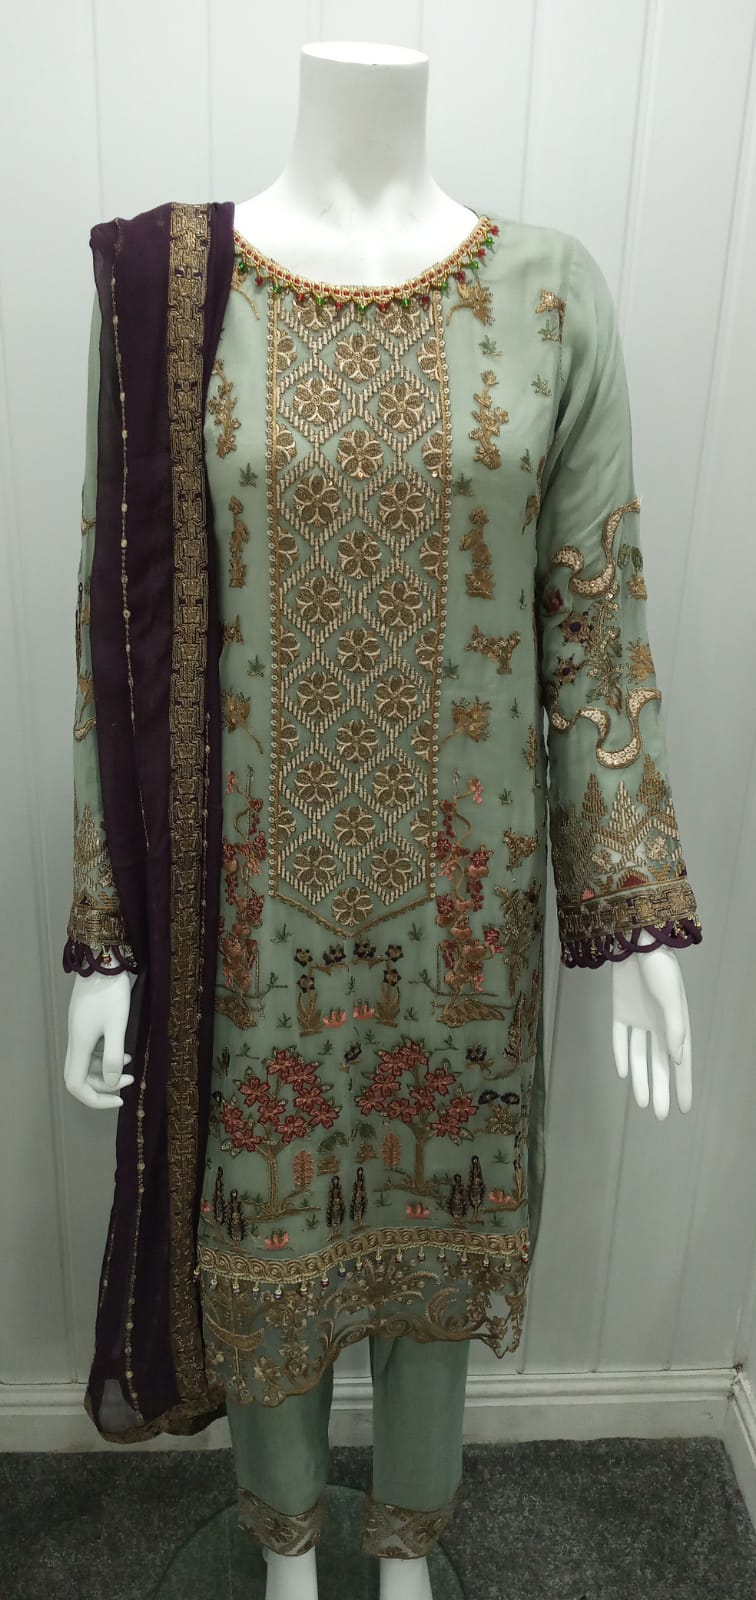 The chiffon embroidery suit style with best quality fabric